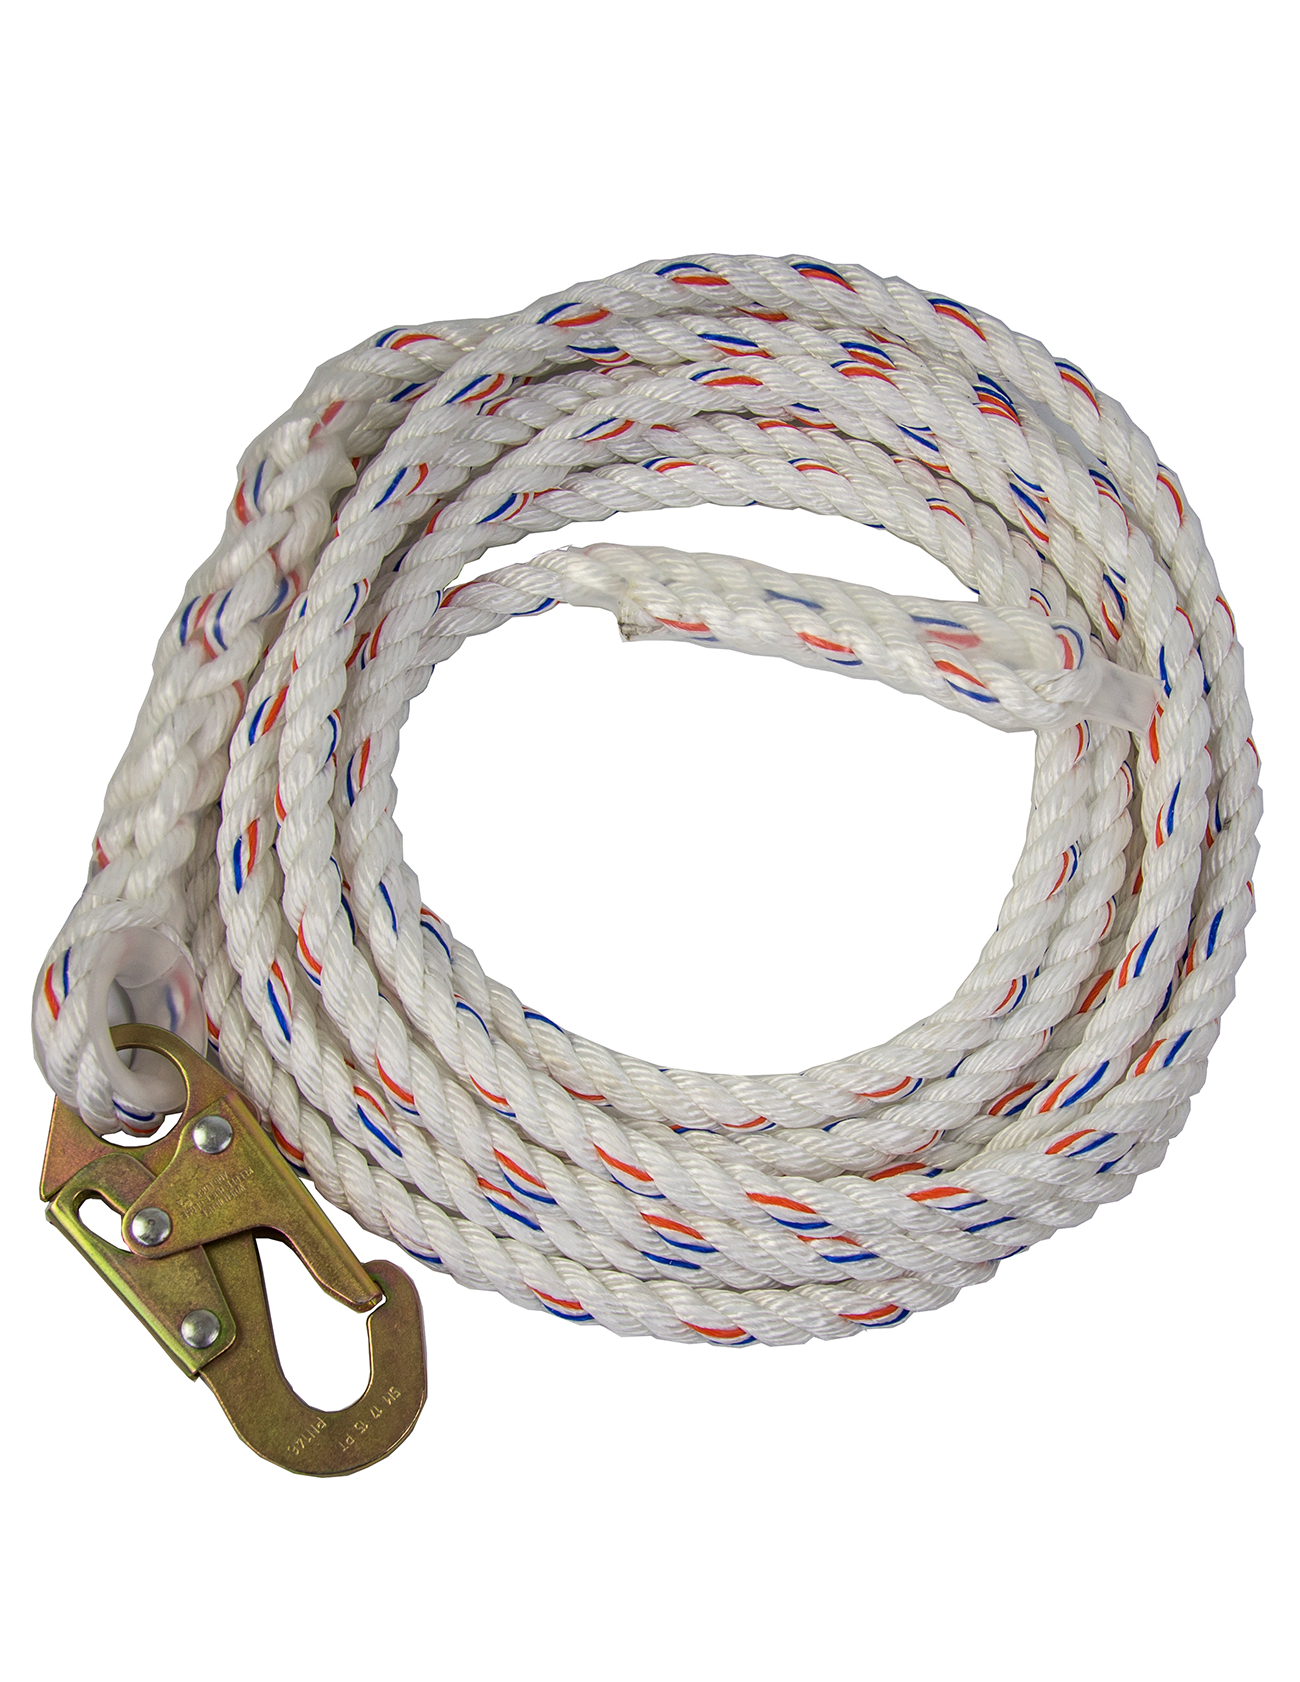 25 ft Lifeline Extension with Snap Hook each End